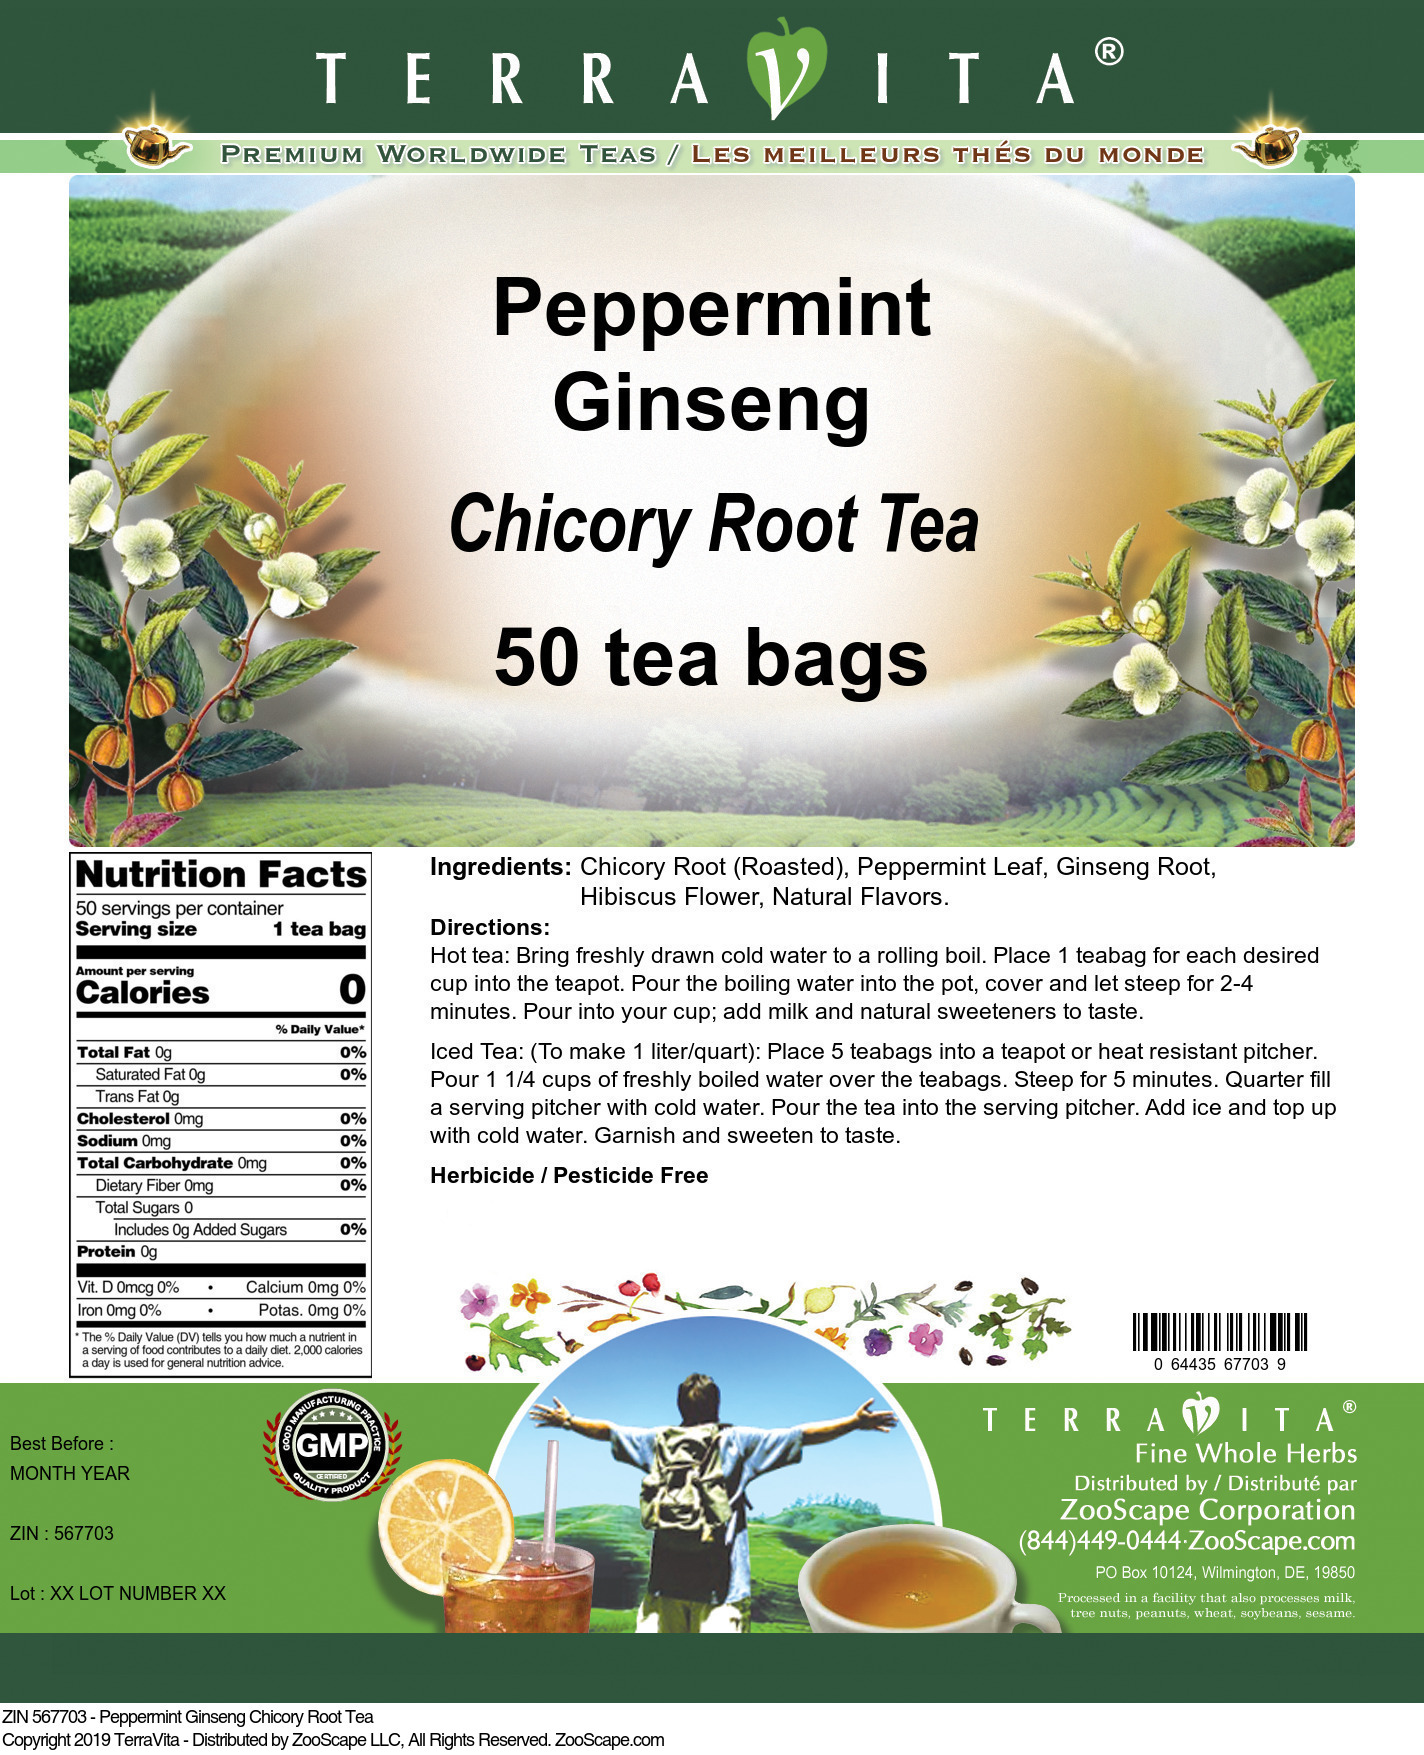 Peppermint Ginseng Chicory Root Tea - Label